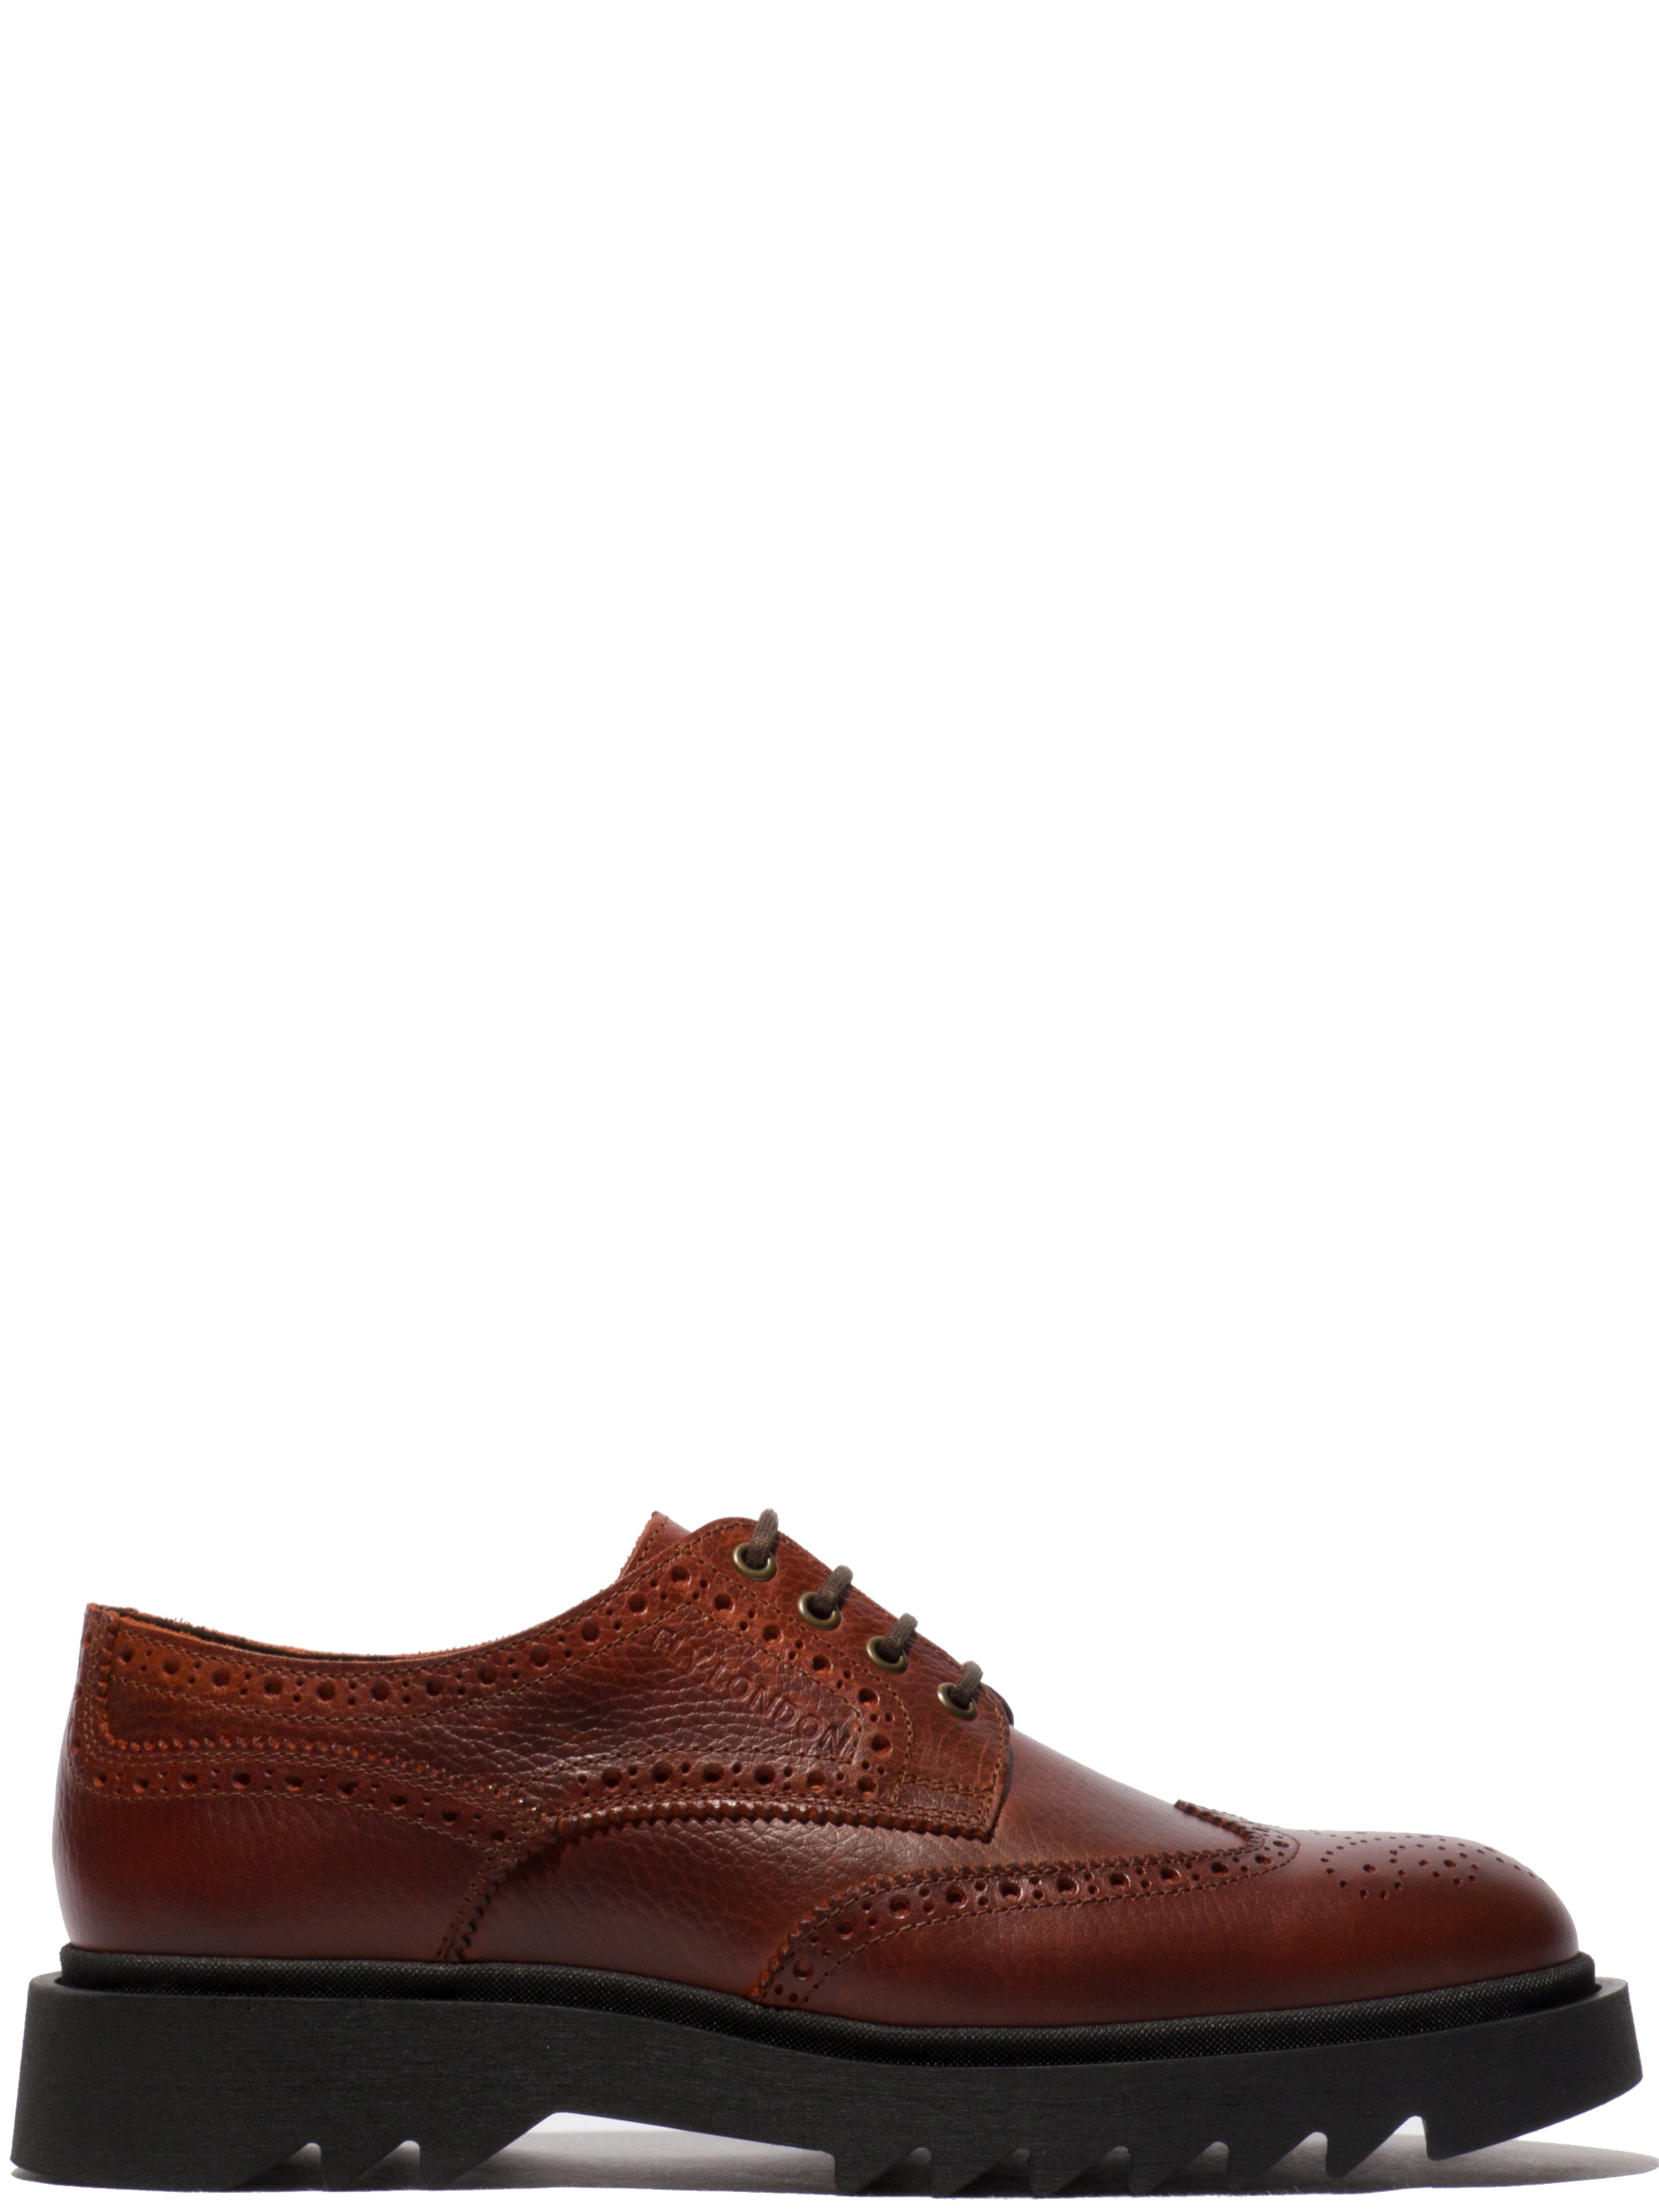 Fly Newt994 Mens Ruff Brandy Leather Lace Up Shoes